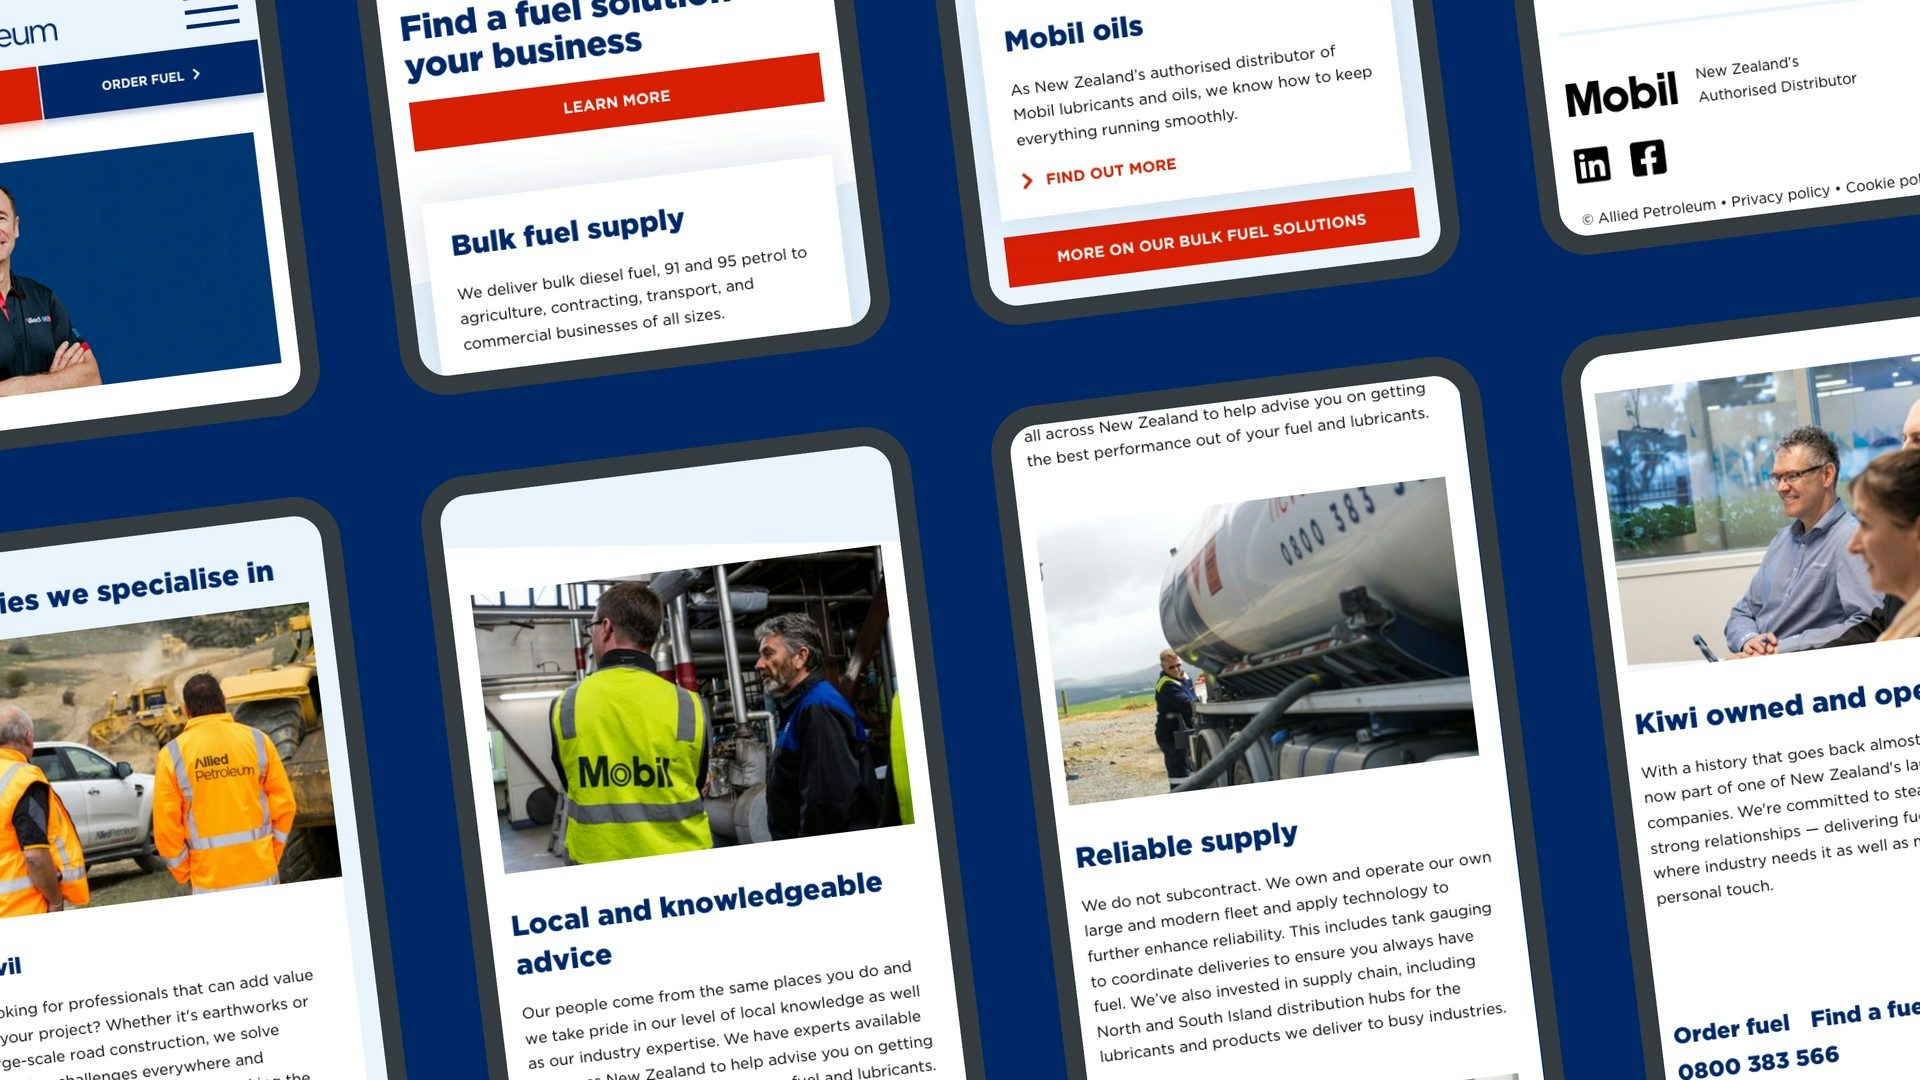 Allied Petroleum website page visuals